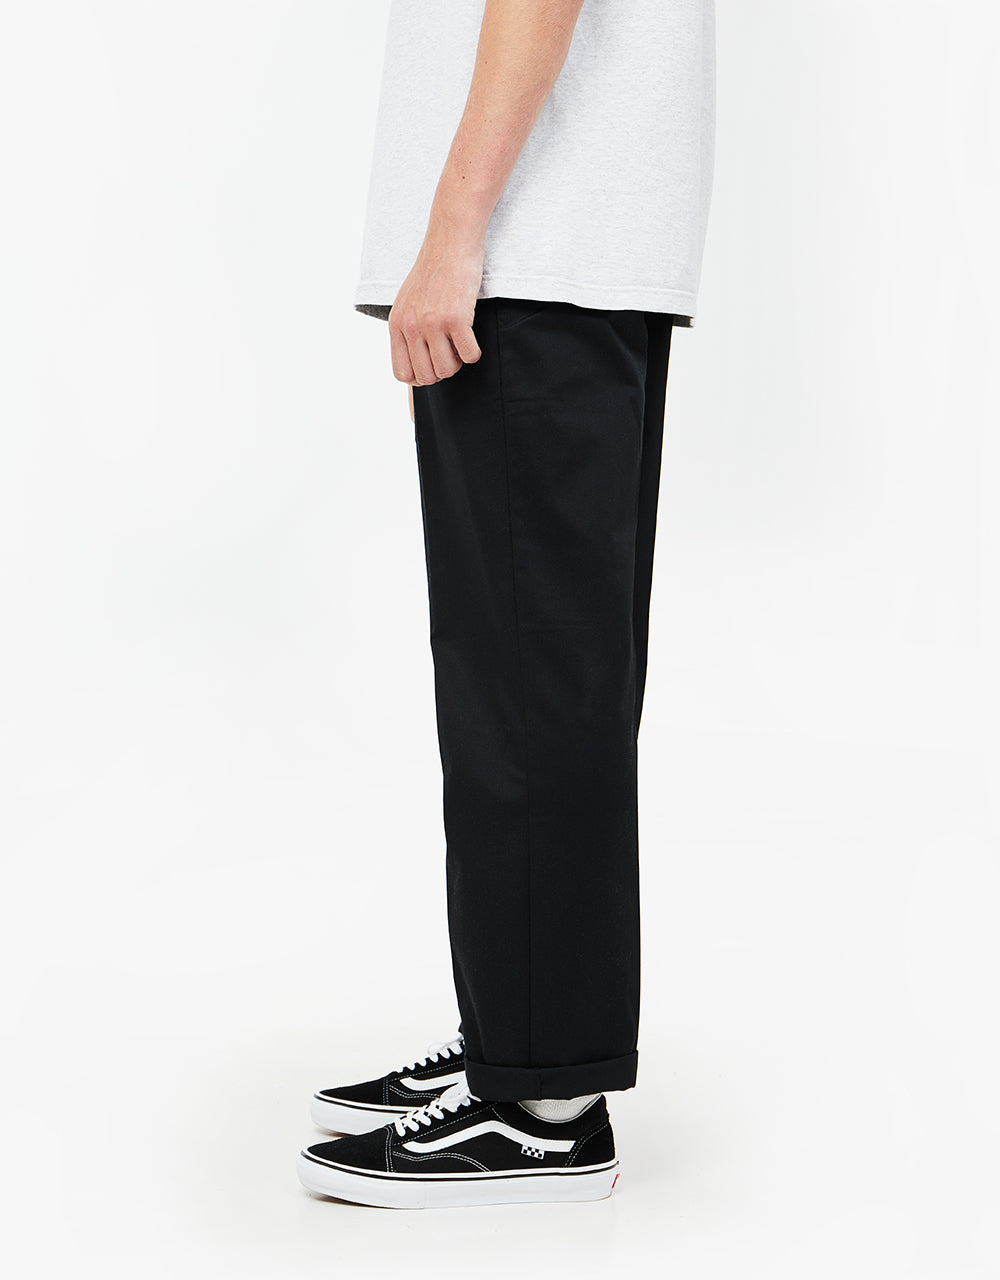 Route One Workpant - Black